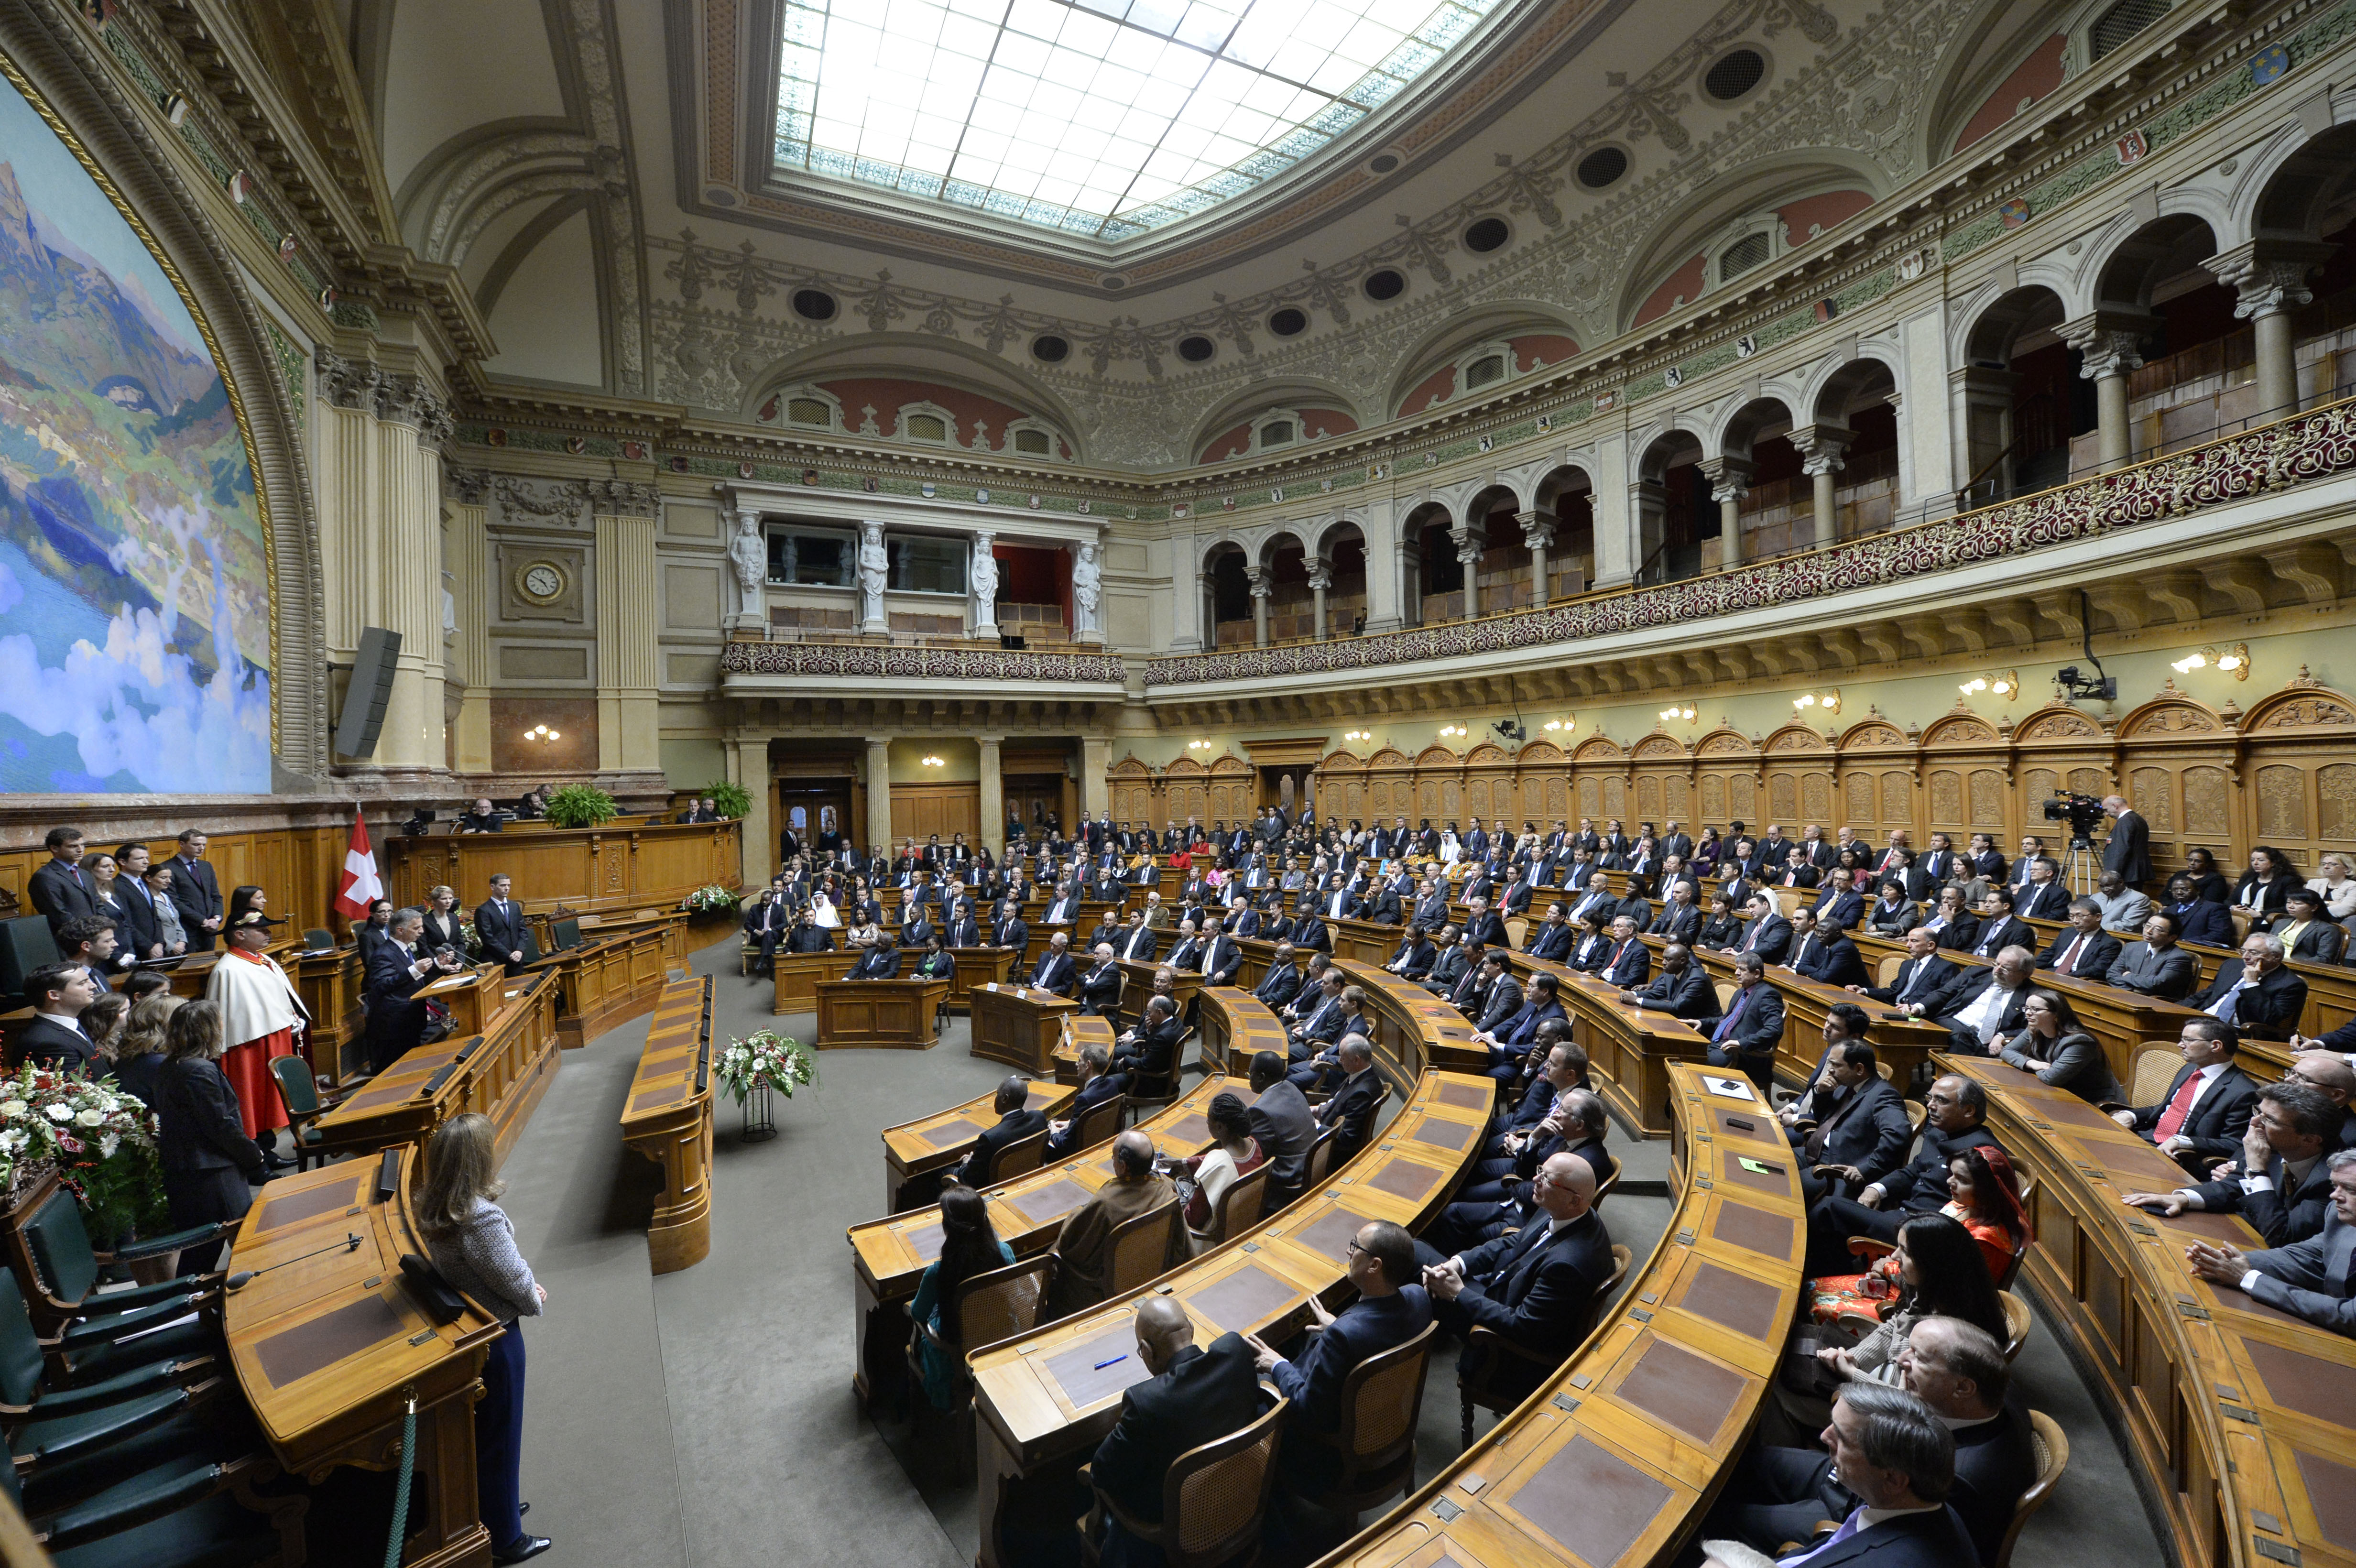 The Apostolic Noncio holds a speech in the chamber of the National Council.